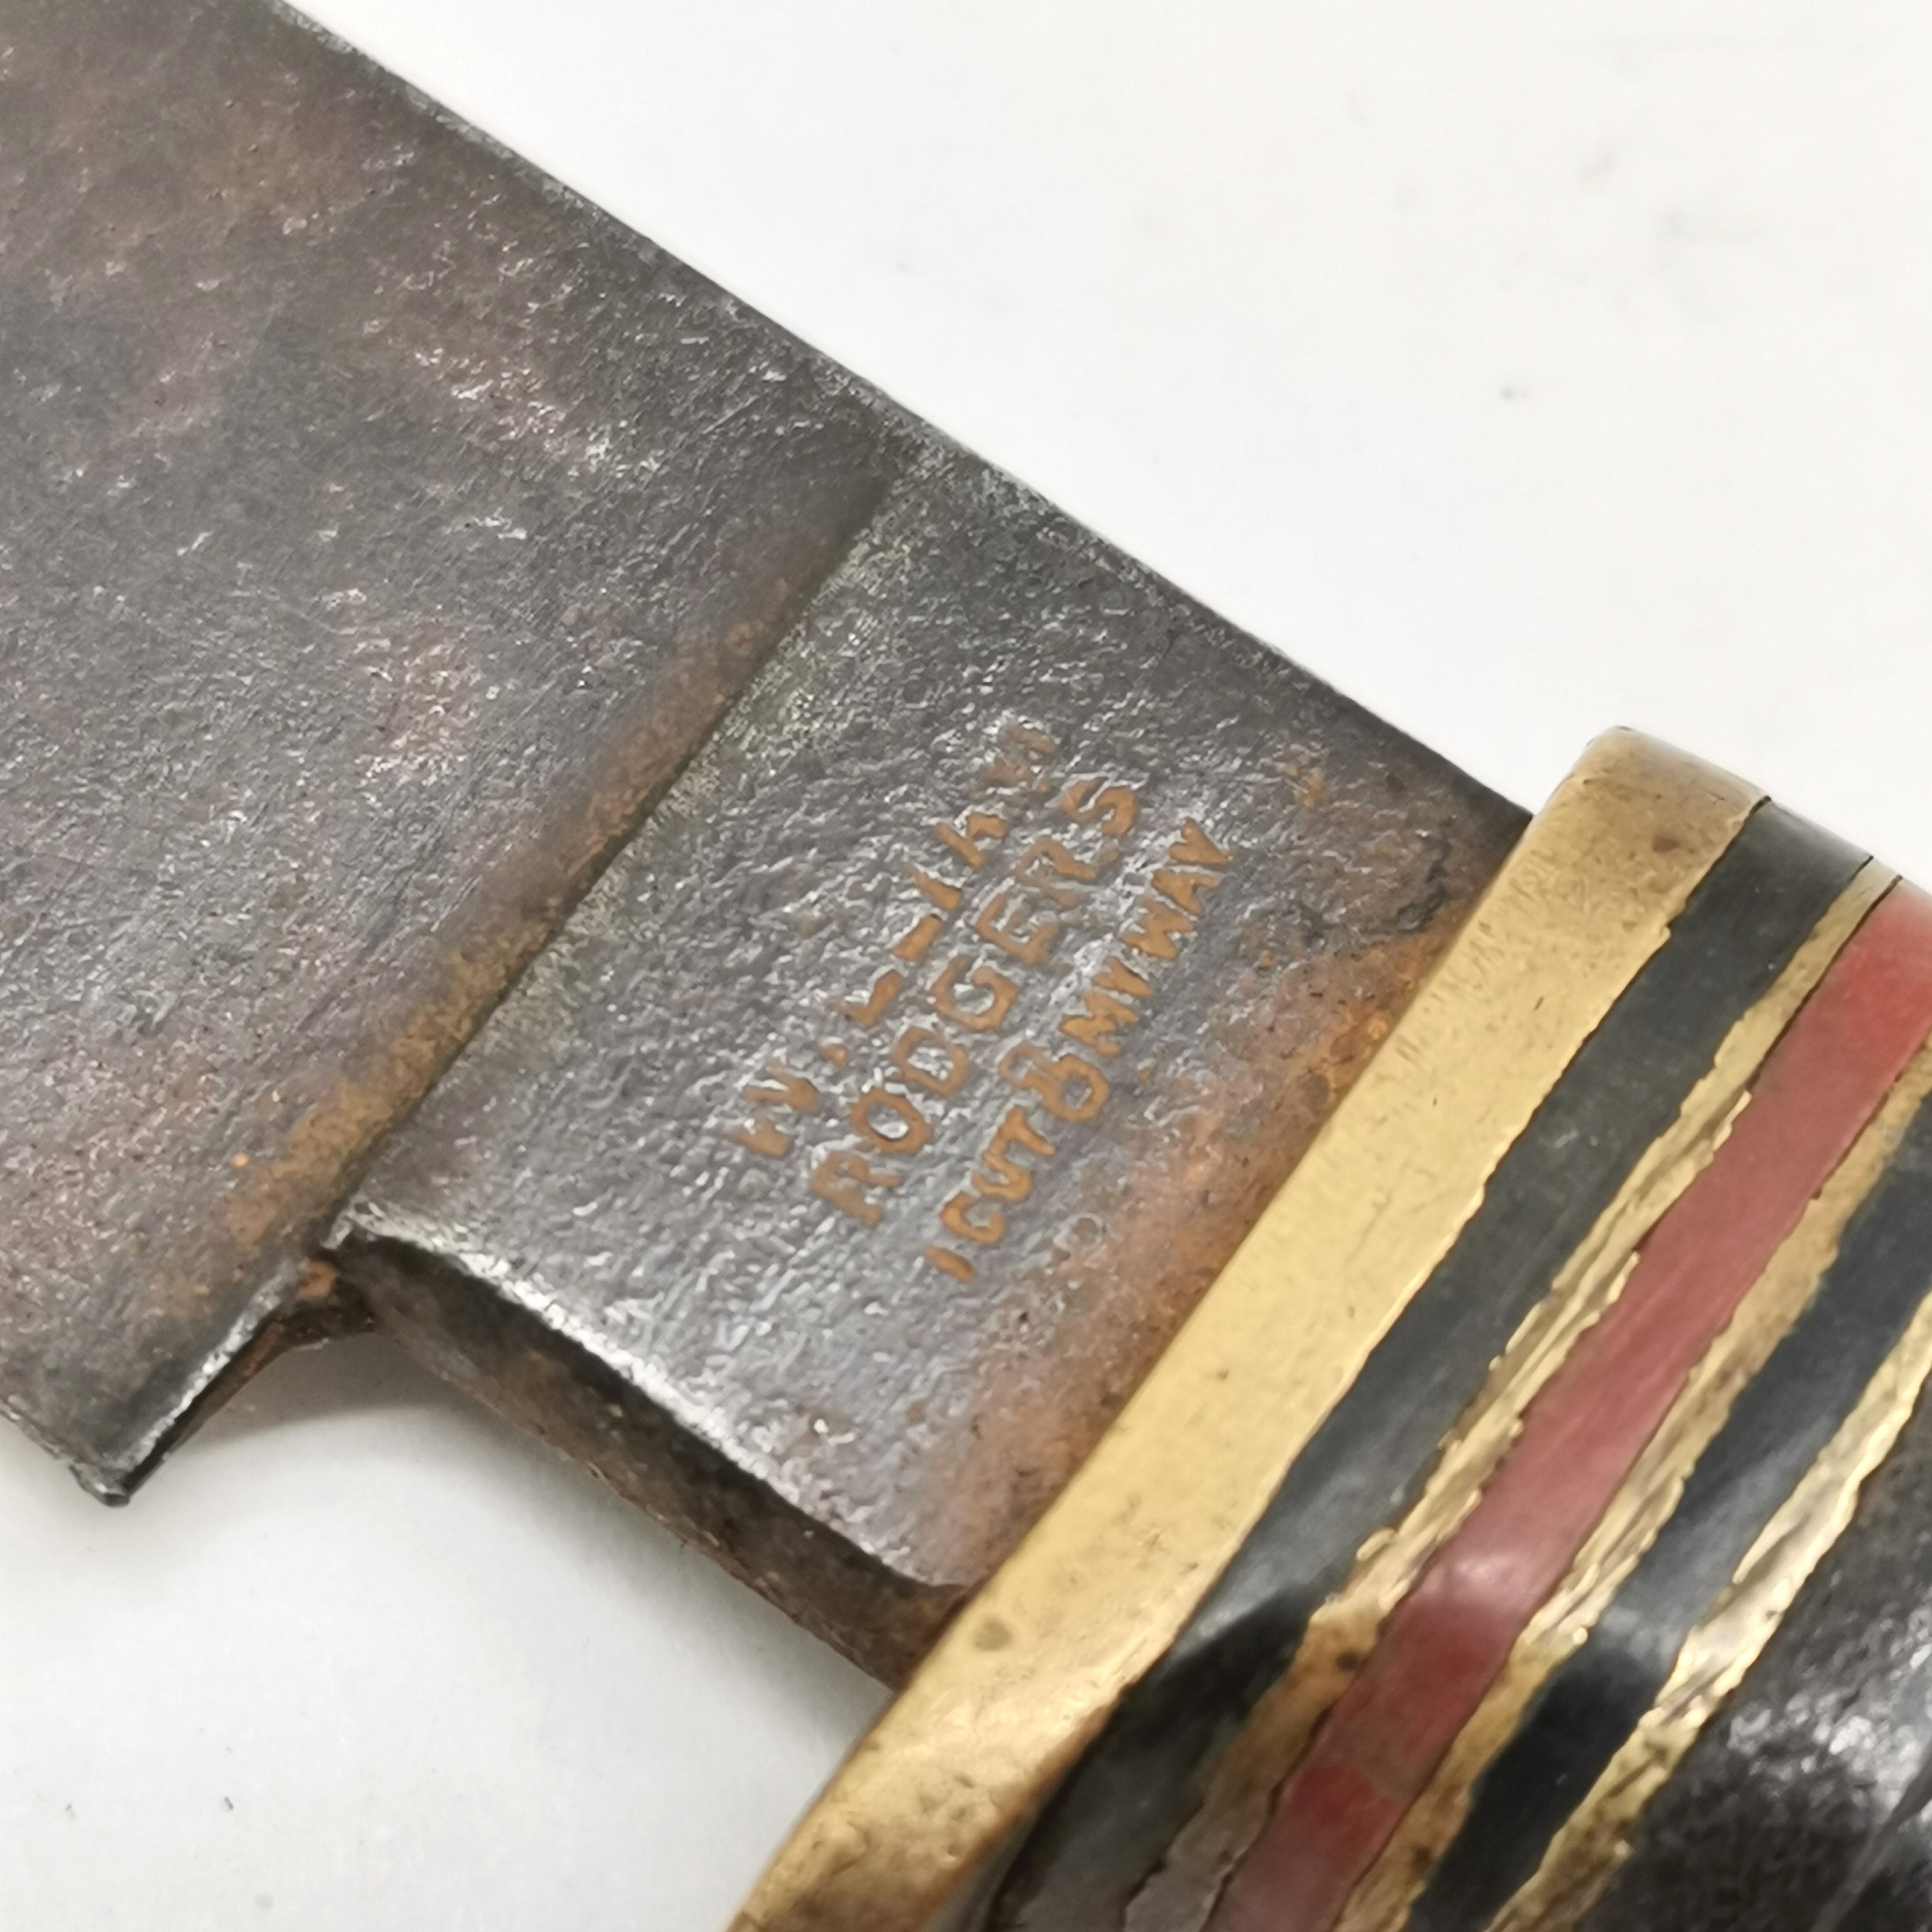 1943 military marked lock knife marked S.S.P. t/w Nowill & Sons sheath knife (23.5cm knife) in - Image 3 of 5